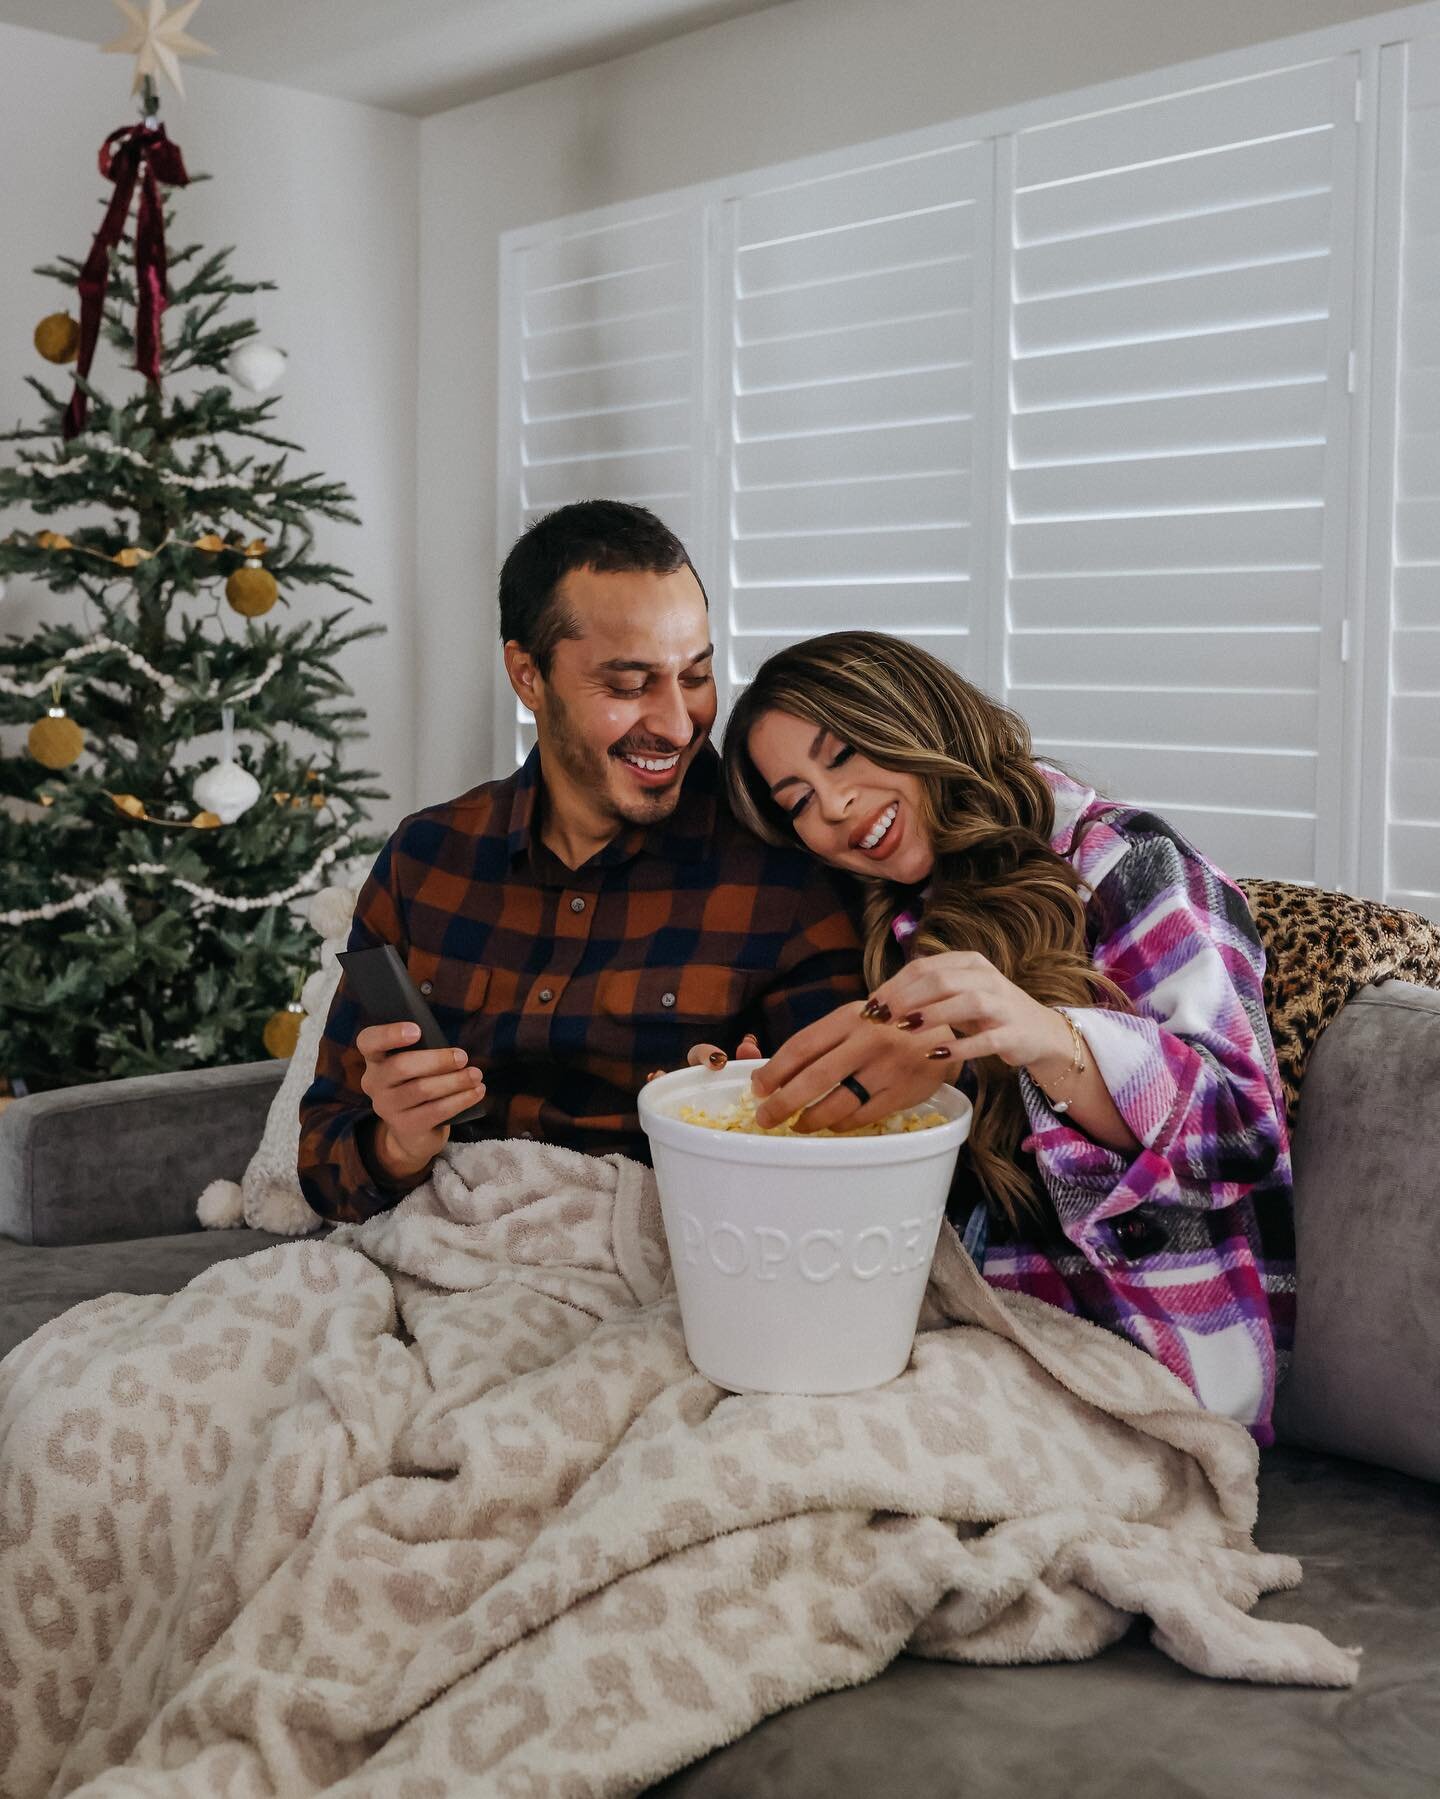 Grab your popcorn because cooler weather means it&rsquo;s time to ramp up those family movie nights! #WalmartPartner

I&rsquo;m so excited to team up with @walmart to share a brand new benefit of the Walmart+ membership that has changed the game! Joi